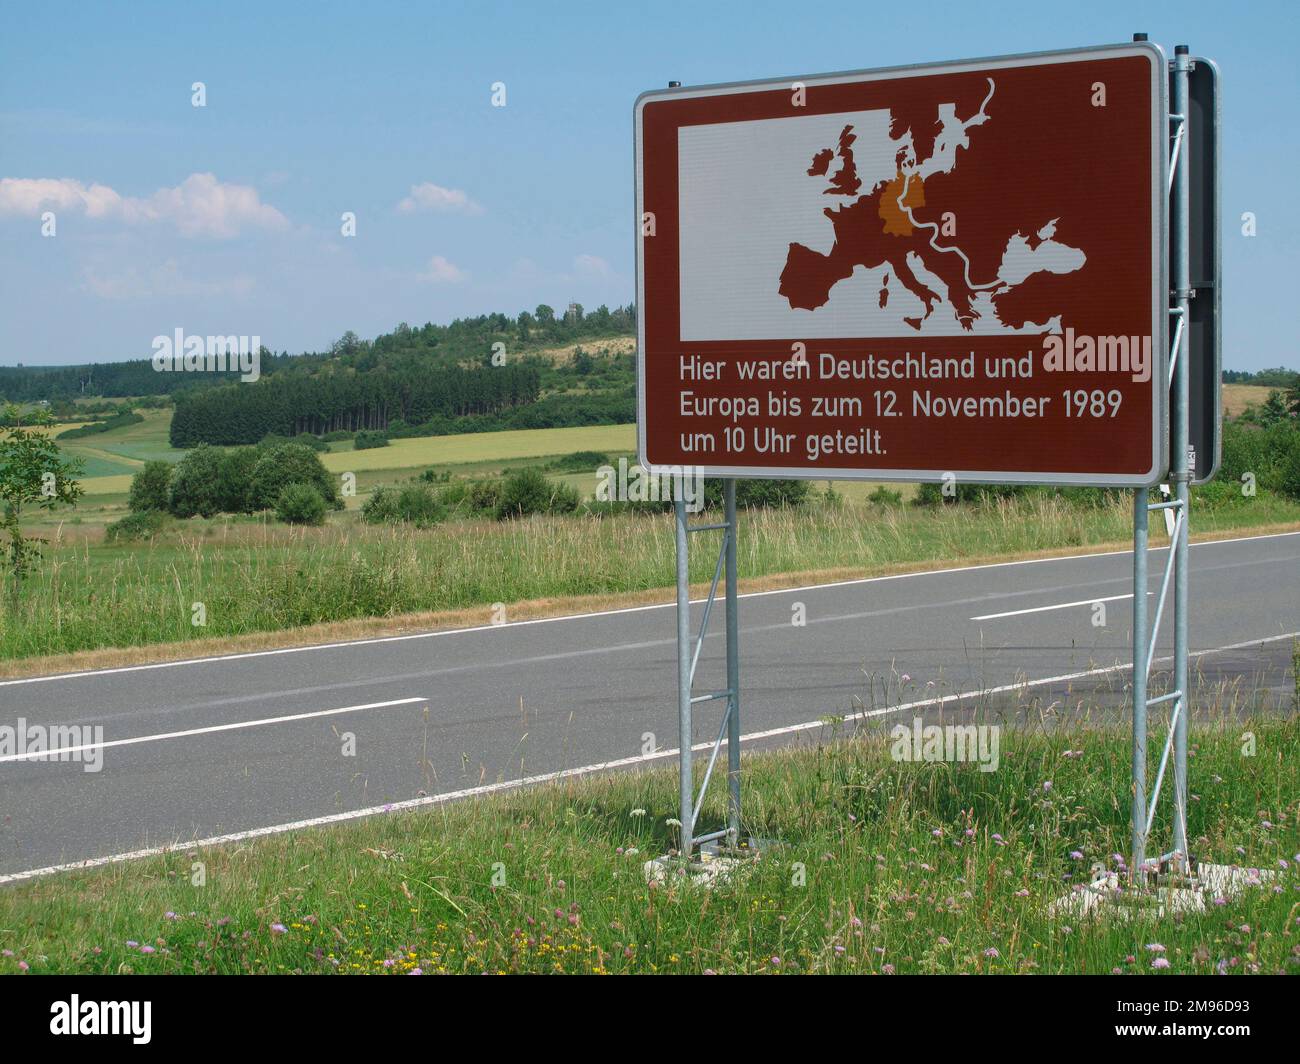 A road sign at Ullitz, Hof-Plauen, Thuringia, Germany, showing the border between East and West Germany, which was changed when the Berlin Wall came down on 12 November 1989. Stock Photo